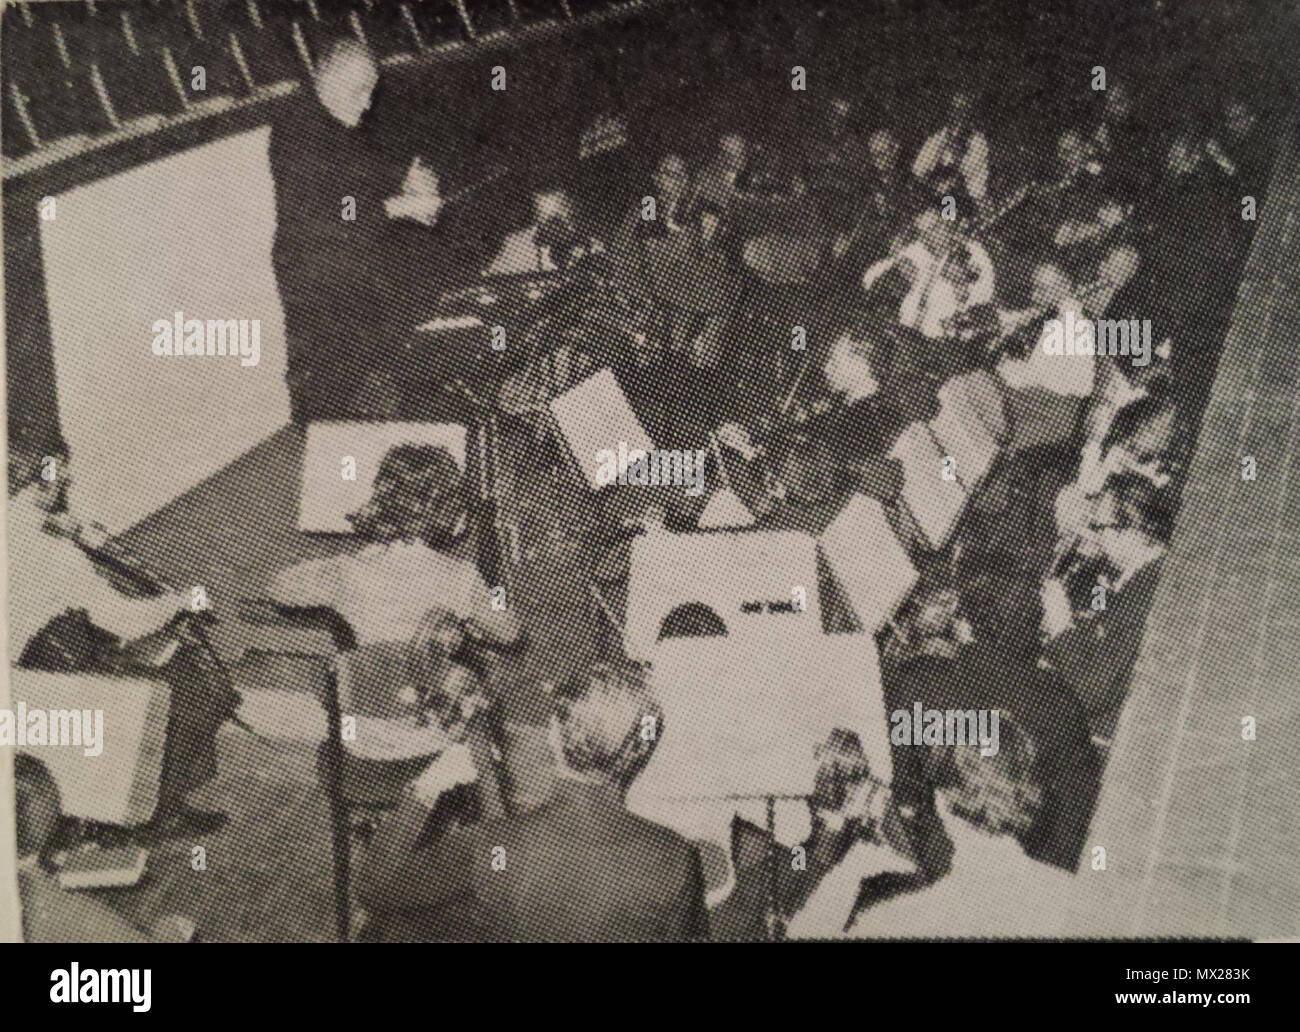 . English: Tehran Opera Orchestra in 1972. Guest conductor: Alberto Erede. The photo has been originally published in the Persian-language monthly Majaleh-ye Musighi (April 1972) . 22 April 1972, 01:03:15. Persian Ministry of Culture and Arts 589 Tehran Opera Orchestra 1972 Stock Photo